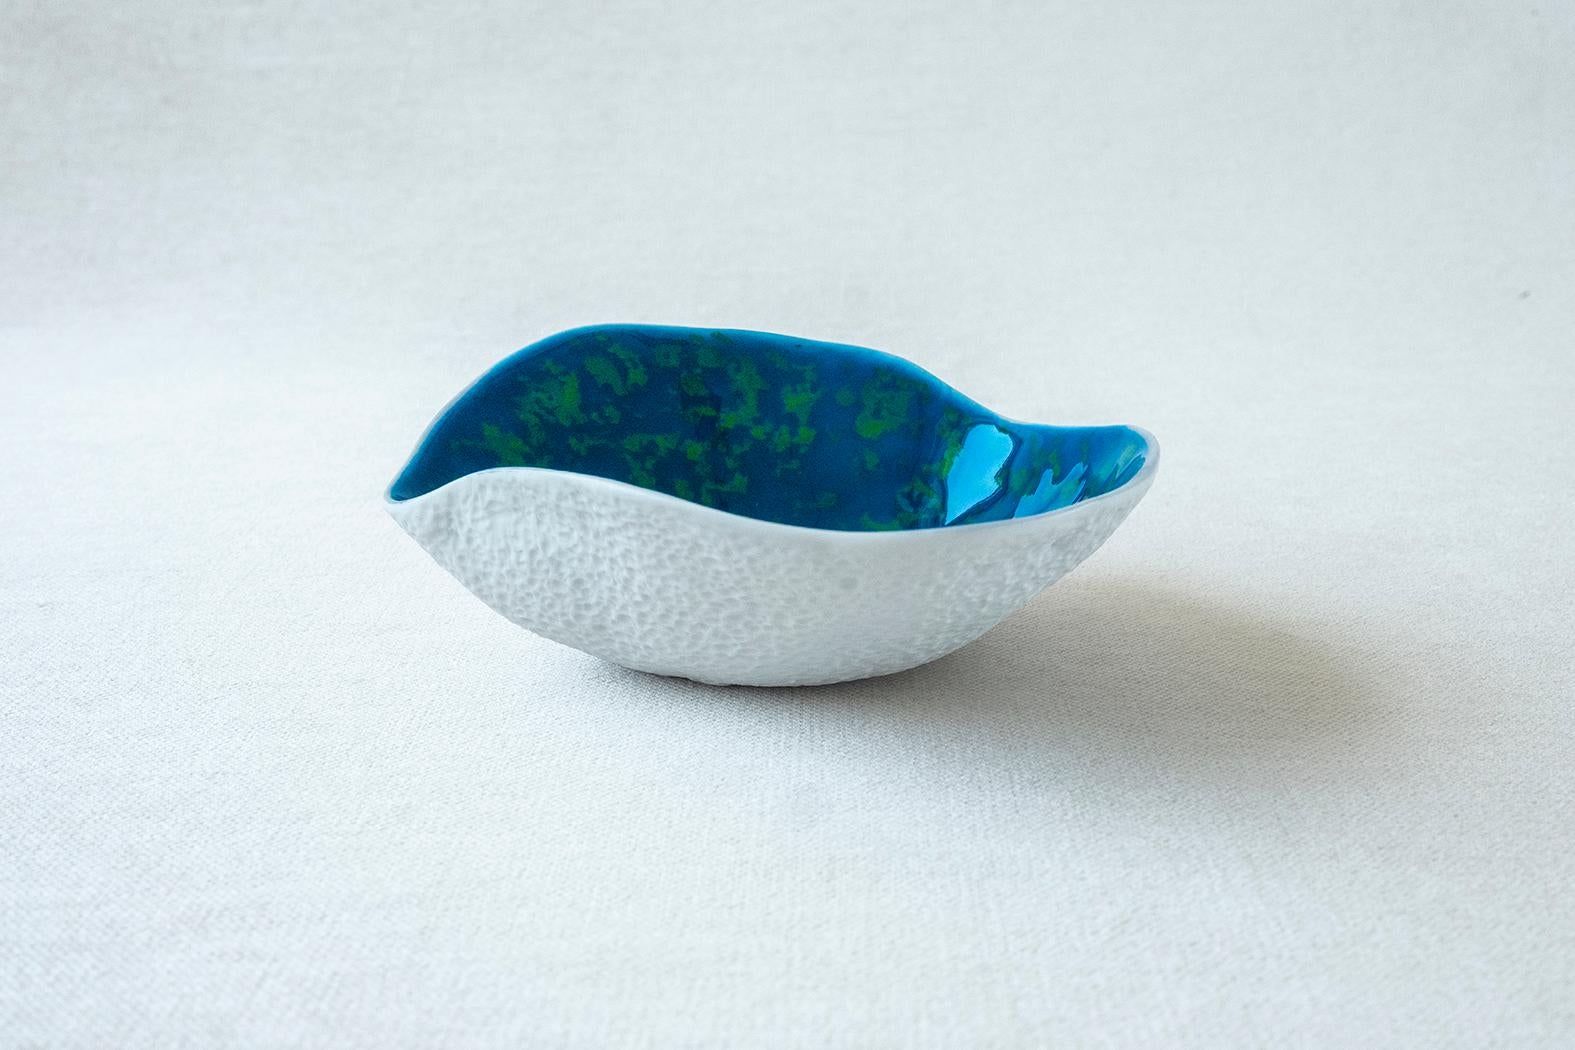 • Small side bowl
• Measures: 10.5cm x 11cm x 4.7cm
• Perfect for a sexy amuse-bouche, a pre-dessert or side dish
• Deep graphite grey top, unglazed textured bottom
• Designed in Amsterdam / handmade in France
• True Porcelaine de Limoges
•